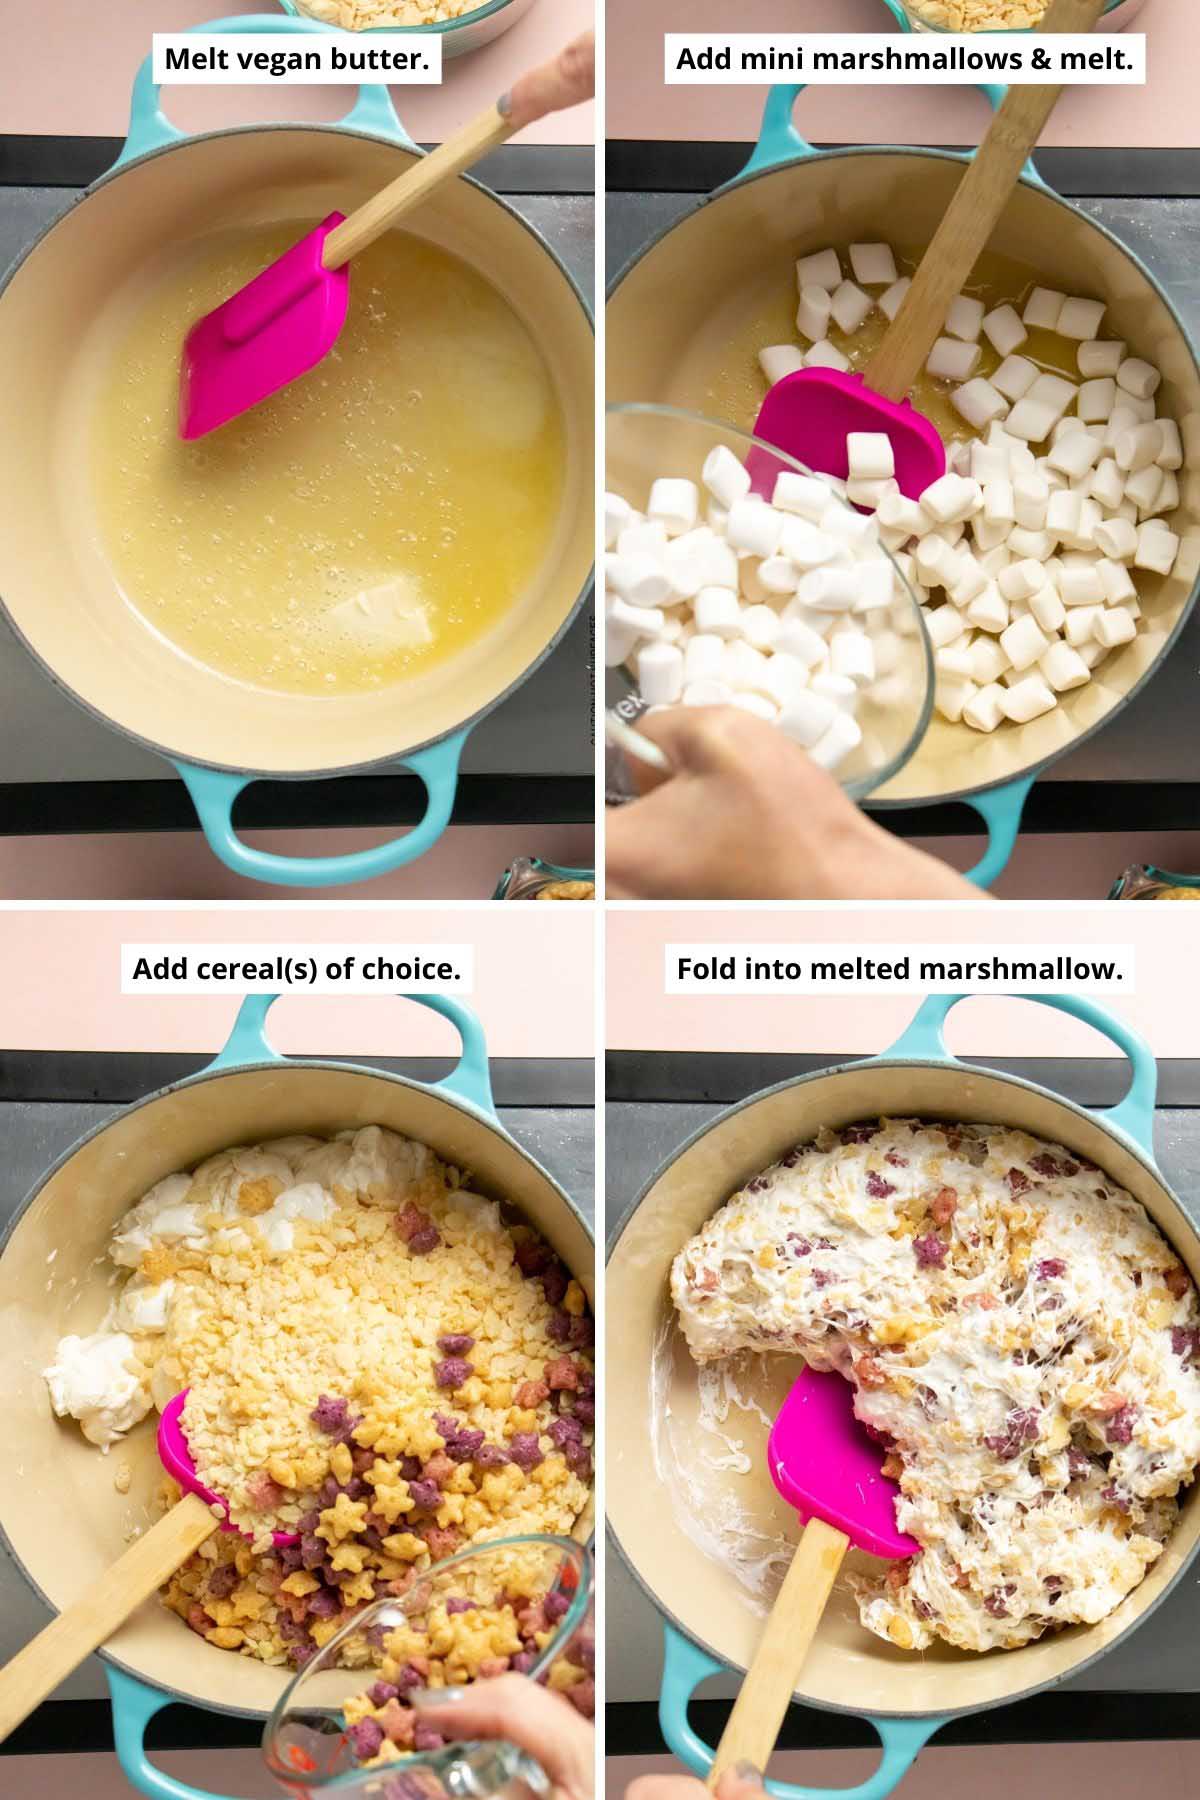 image collage showing melting butter, adding marshmallows, and adding cereal before and after mixing